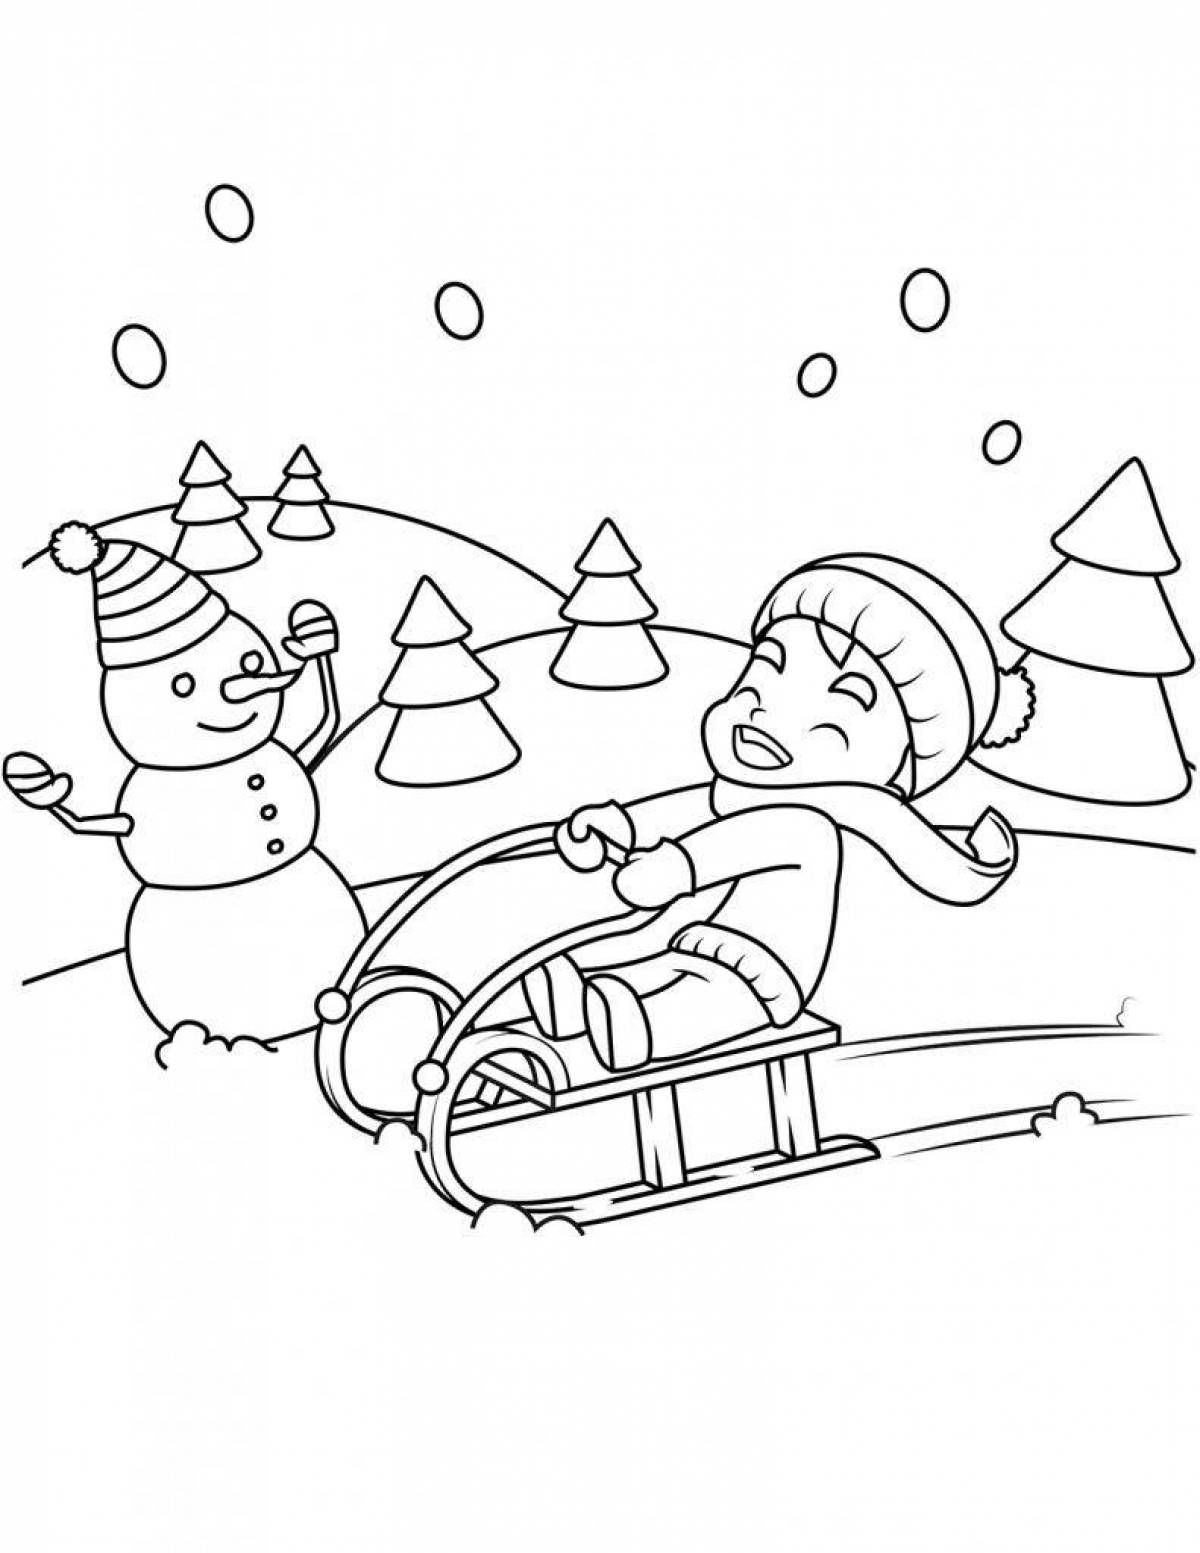 Coloring page energetic children sledding